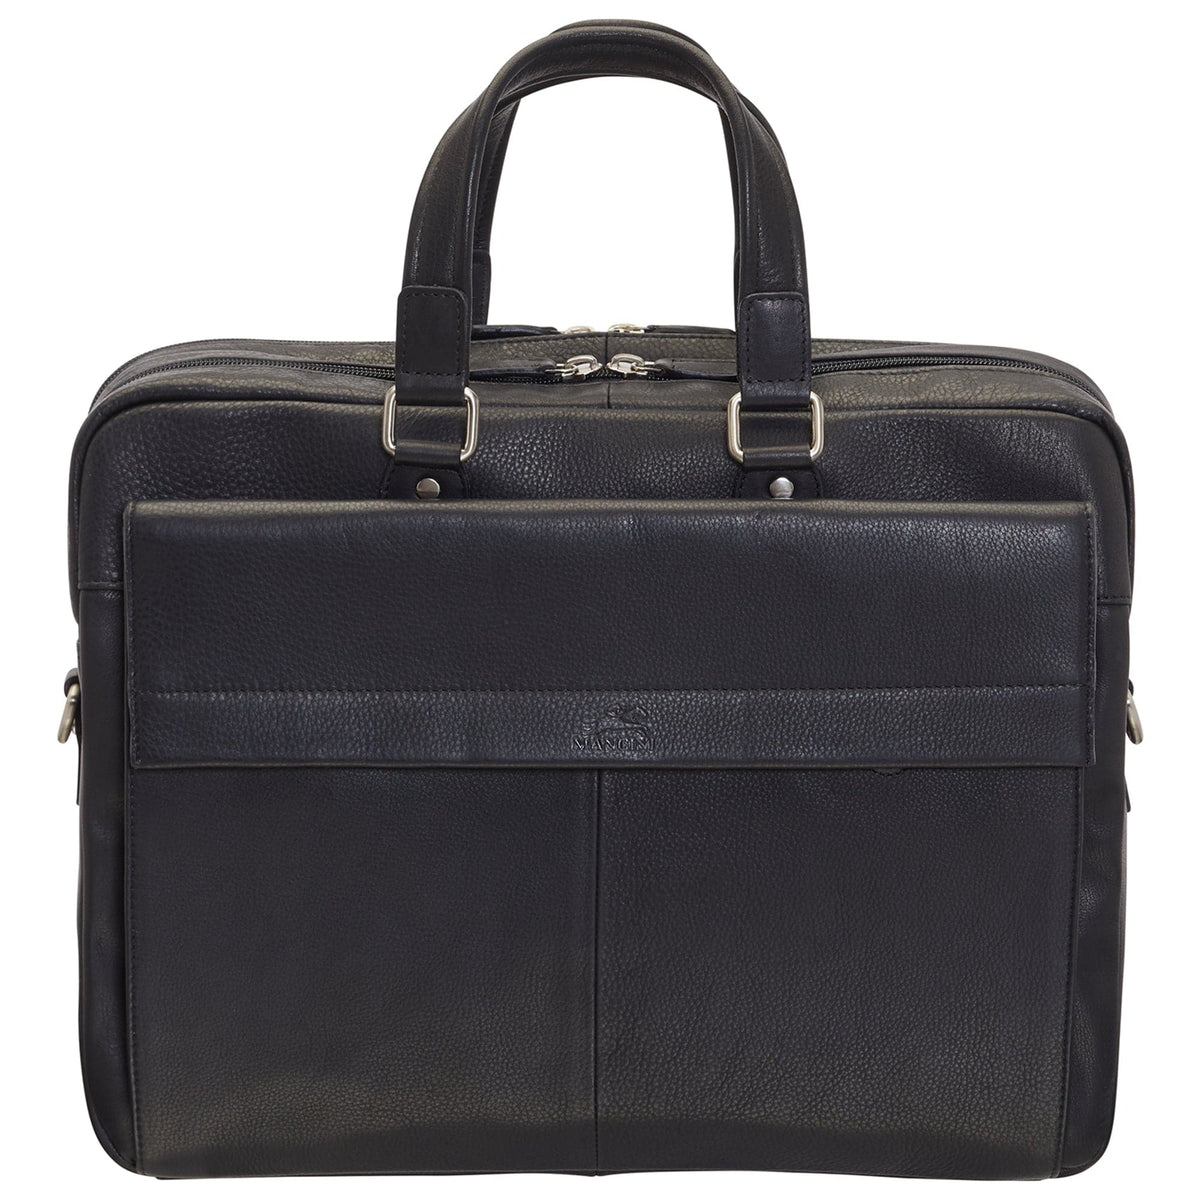 Mancini Colombian Double Compartment Briefcase for 16.25” Laptop and Tablet